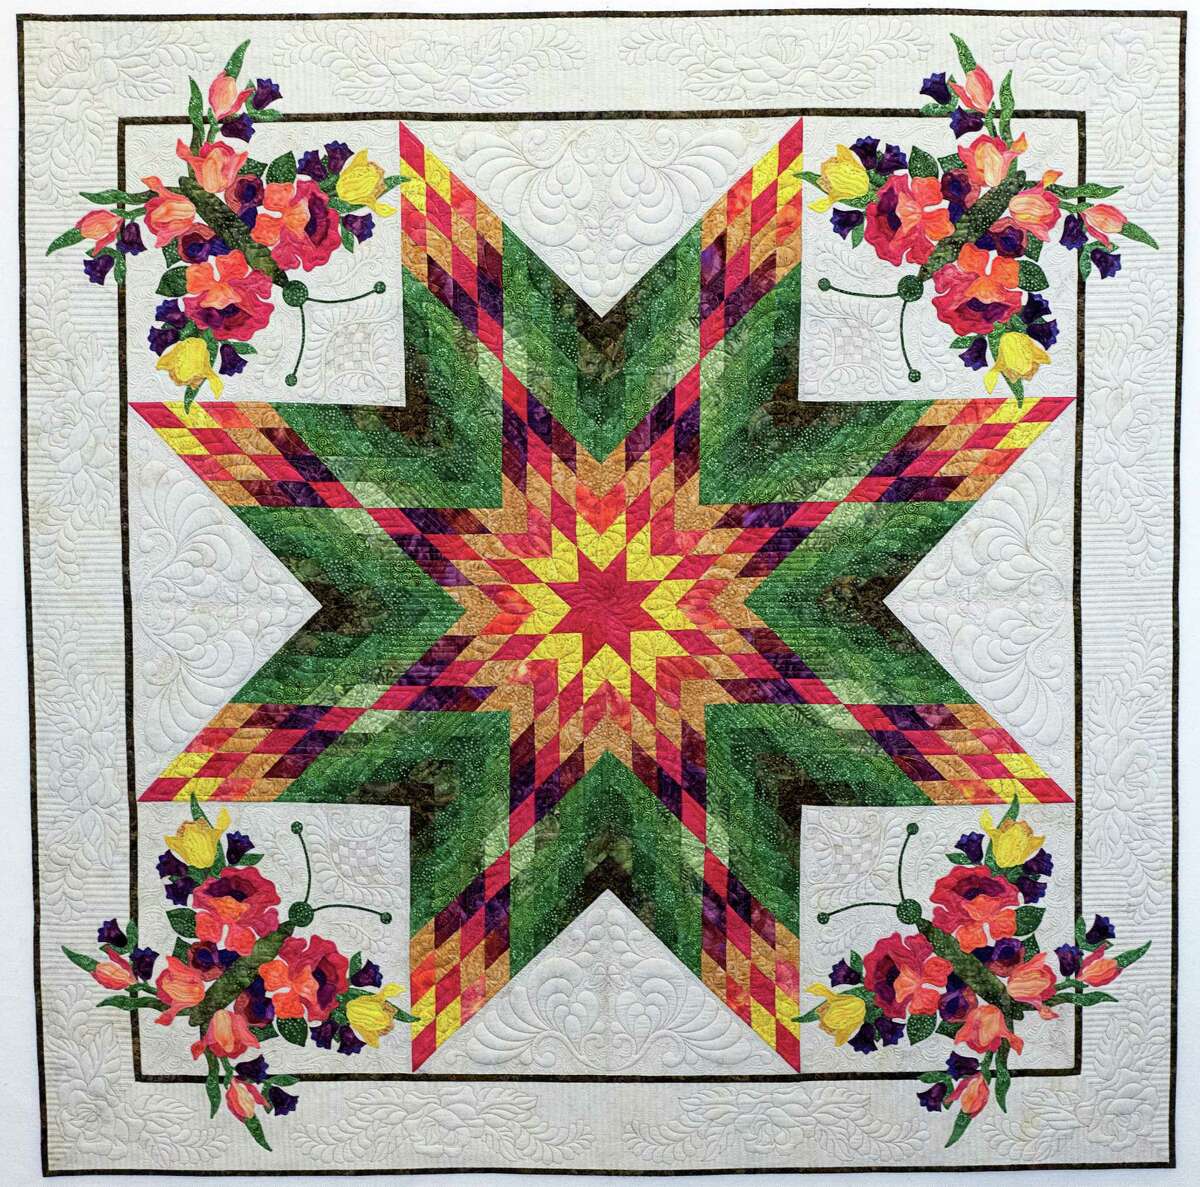 Houston quilt festival attracts 60,000